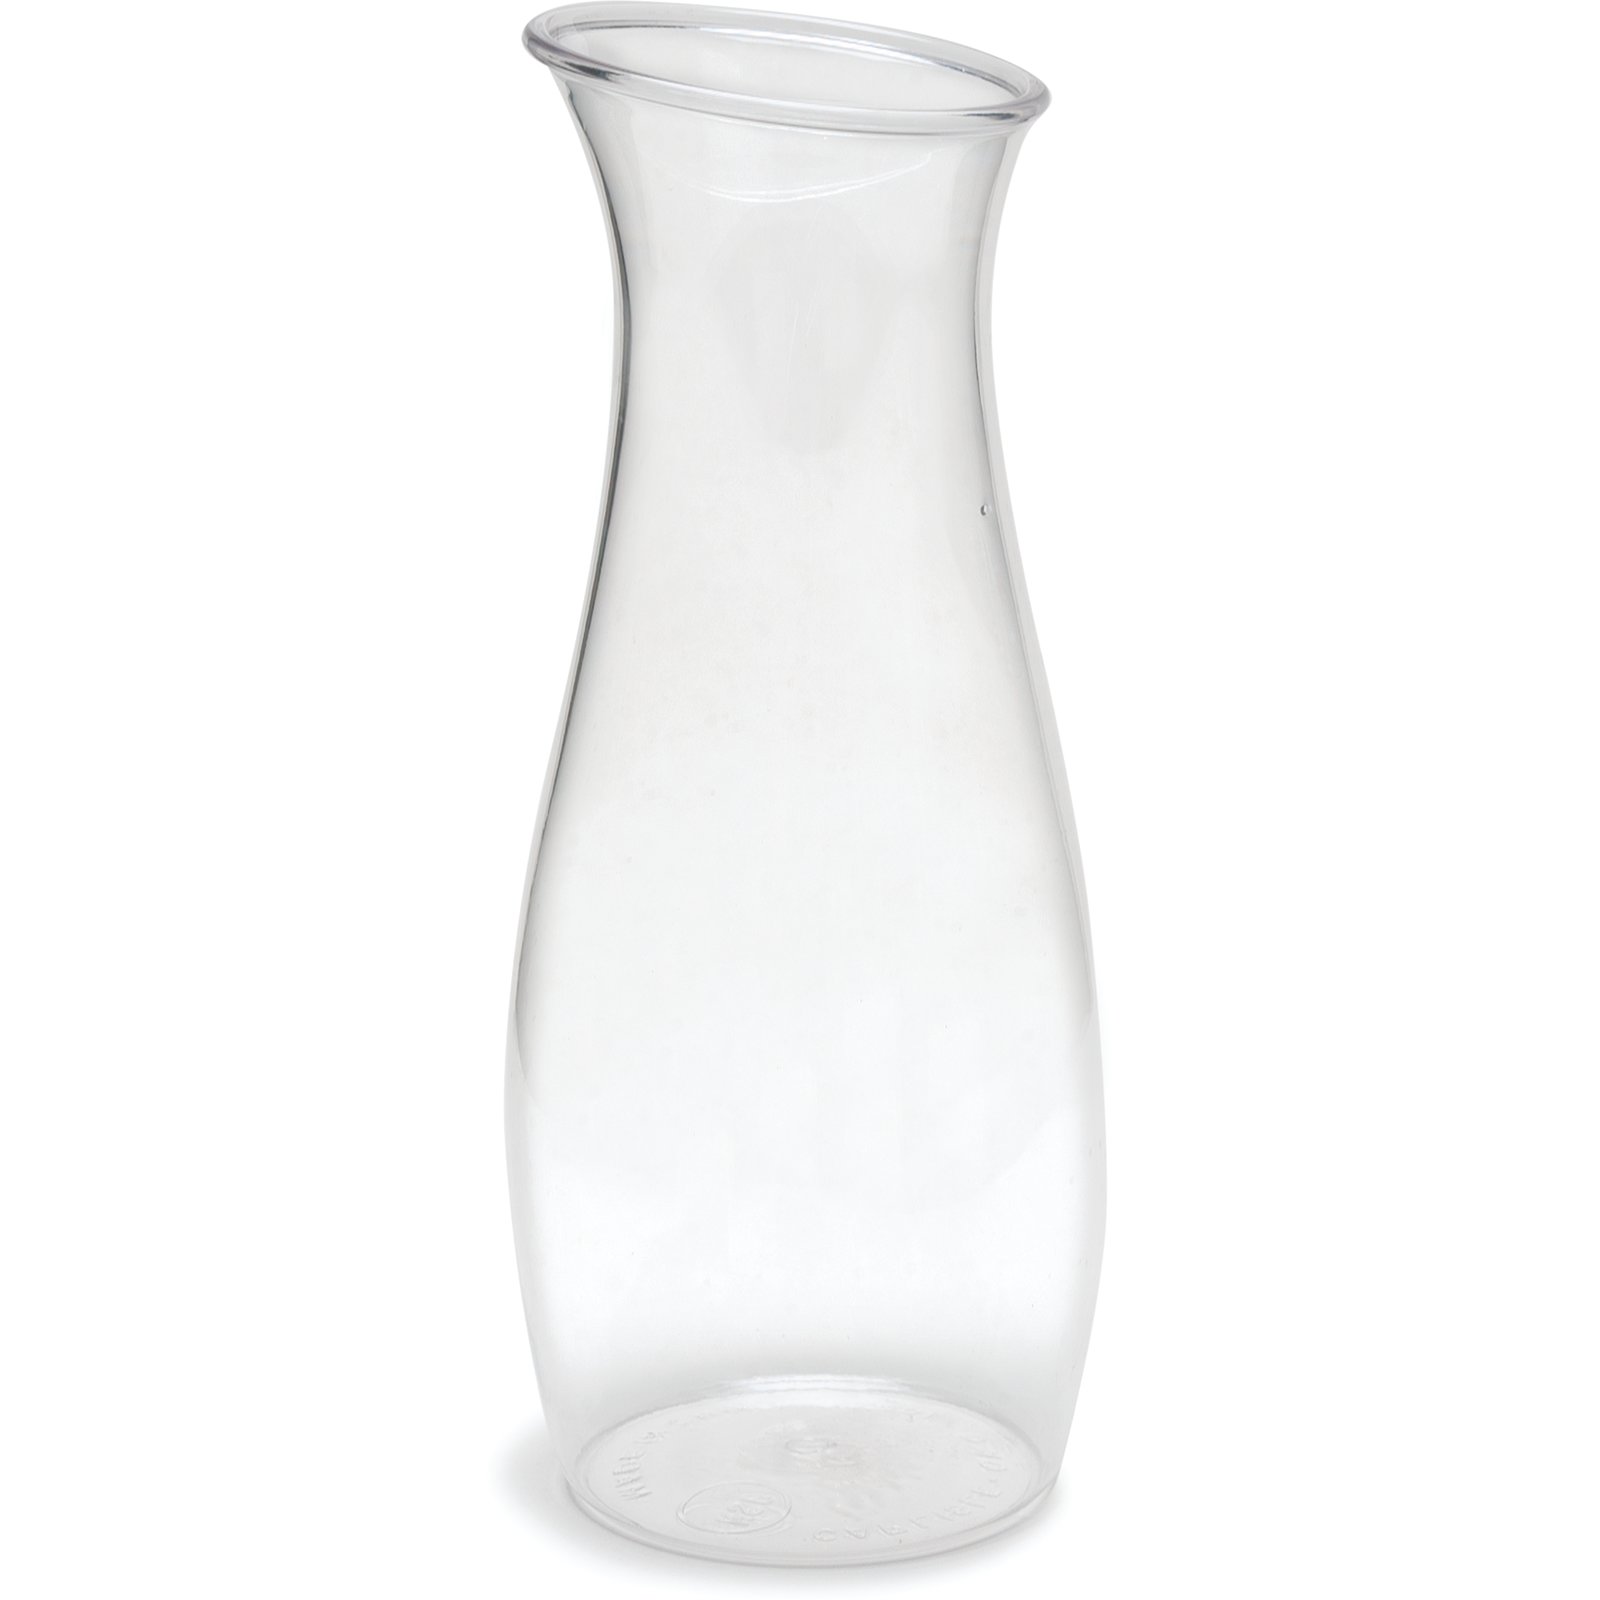 Polycarbonate Juice Carafe Container with Lid - 1 Liter